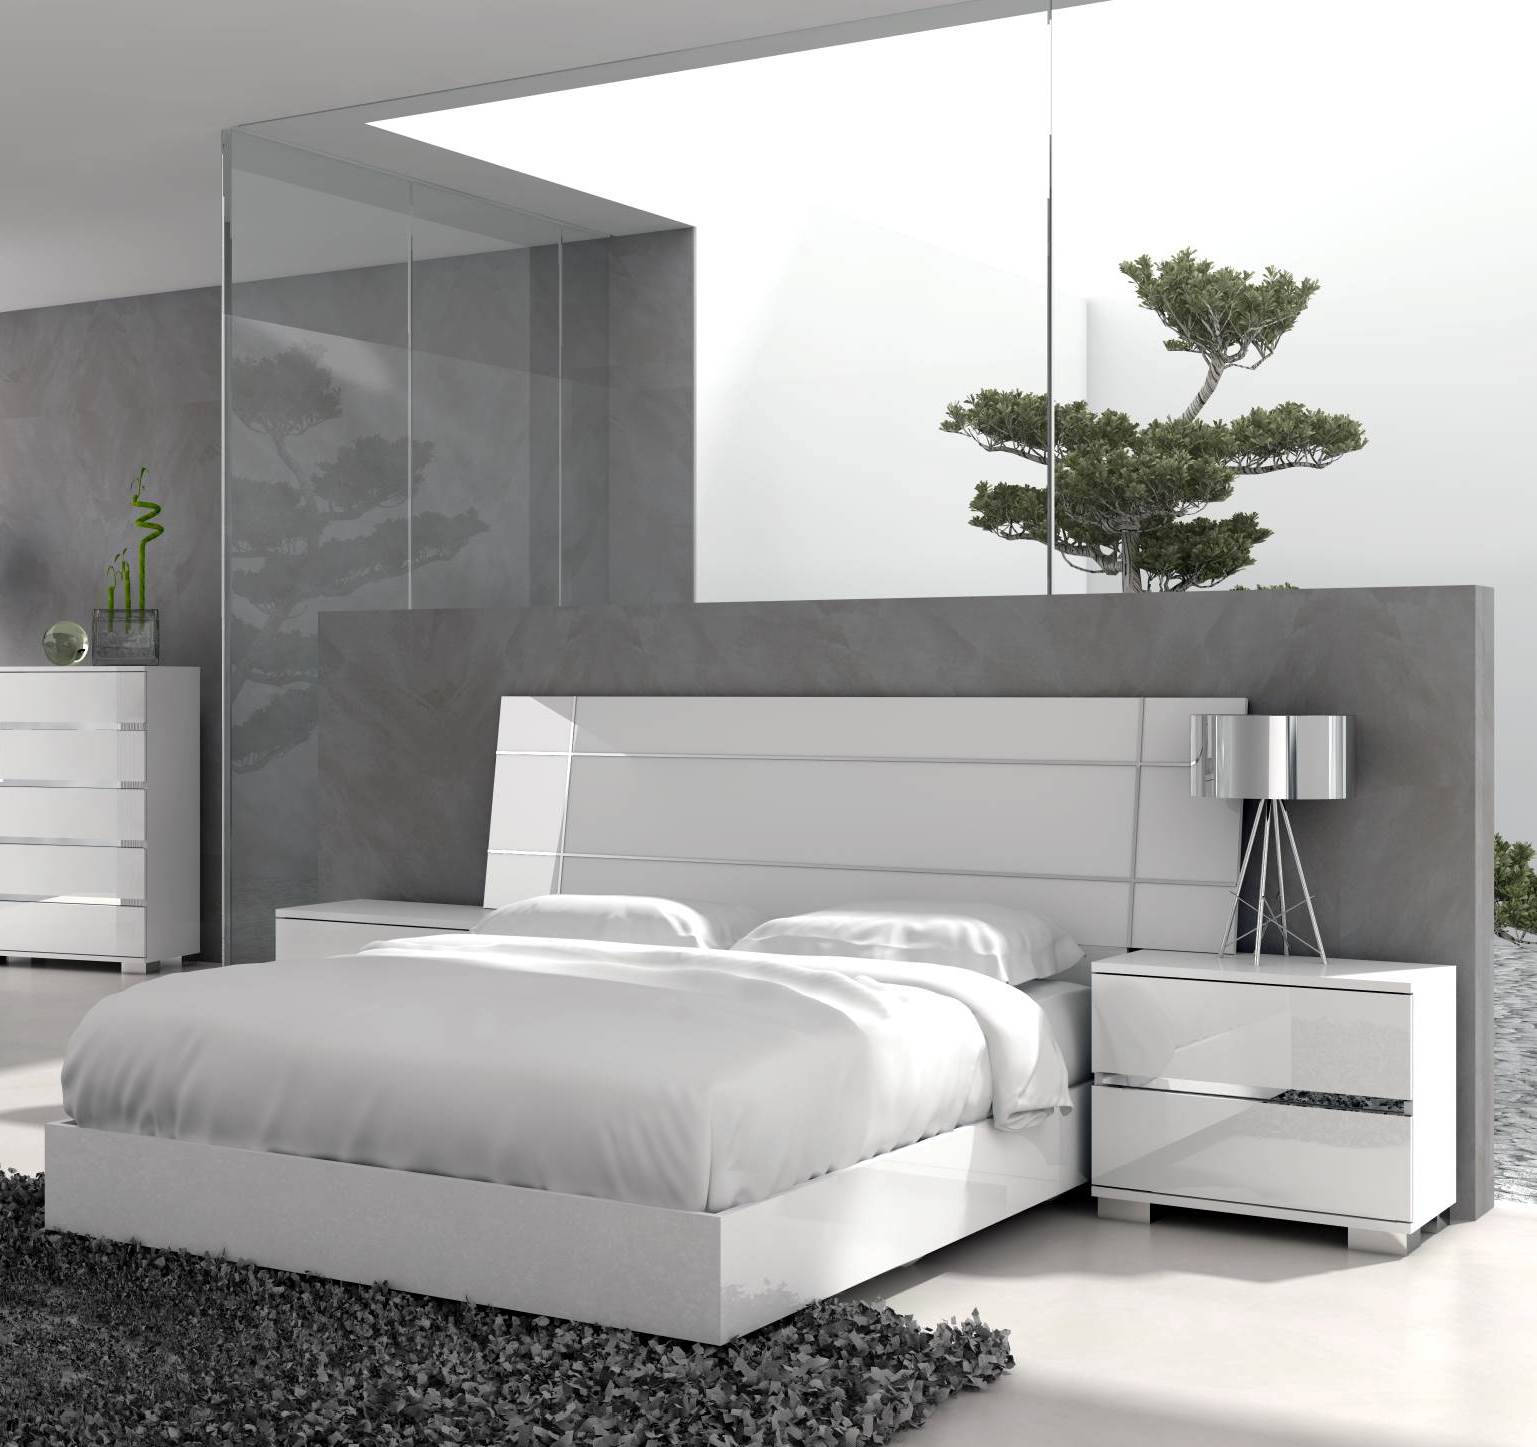 Bedroom Icon at Vectorified.com | Collection of Bedroom Icon free for ...